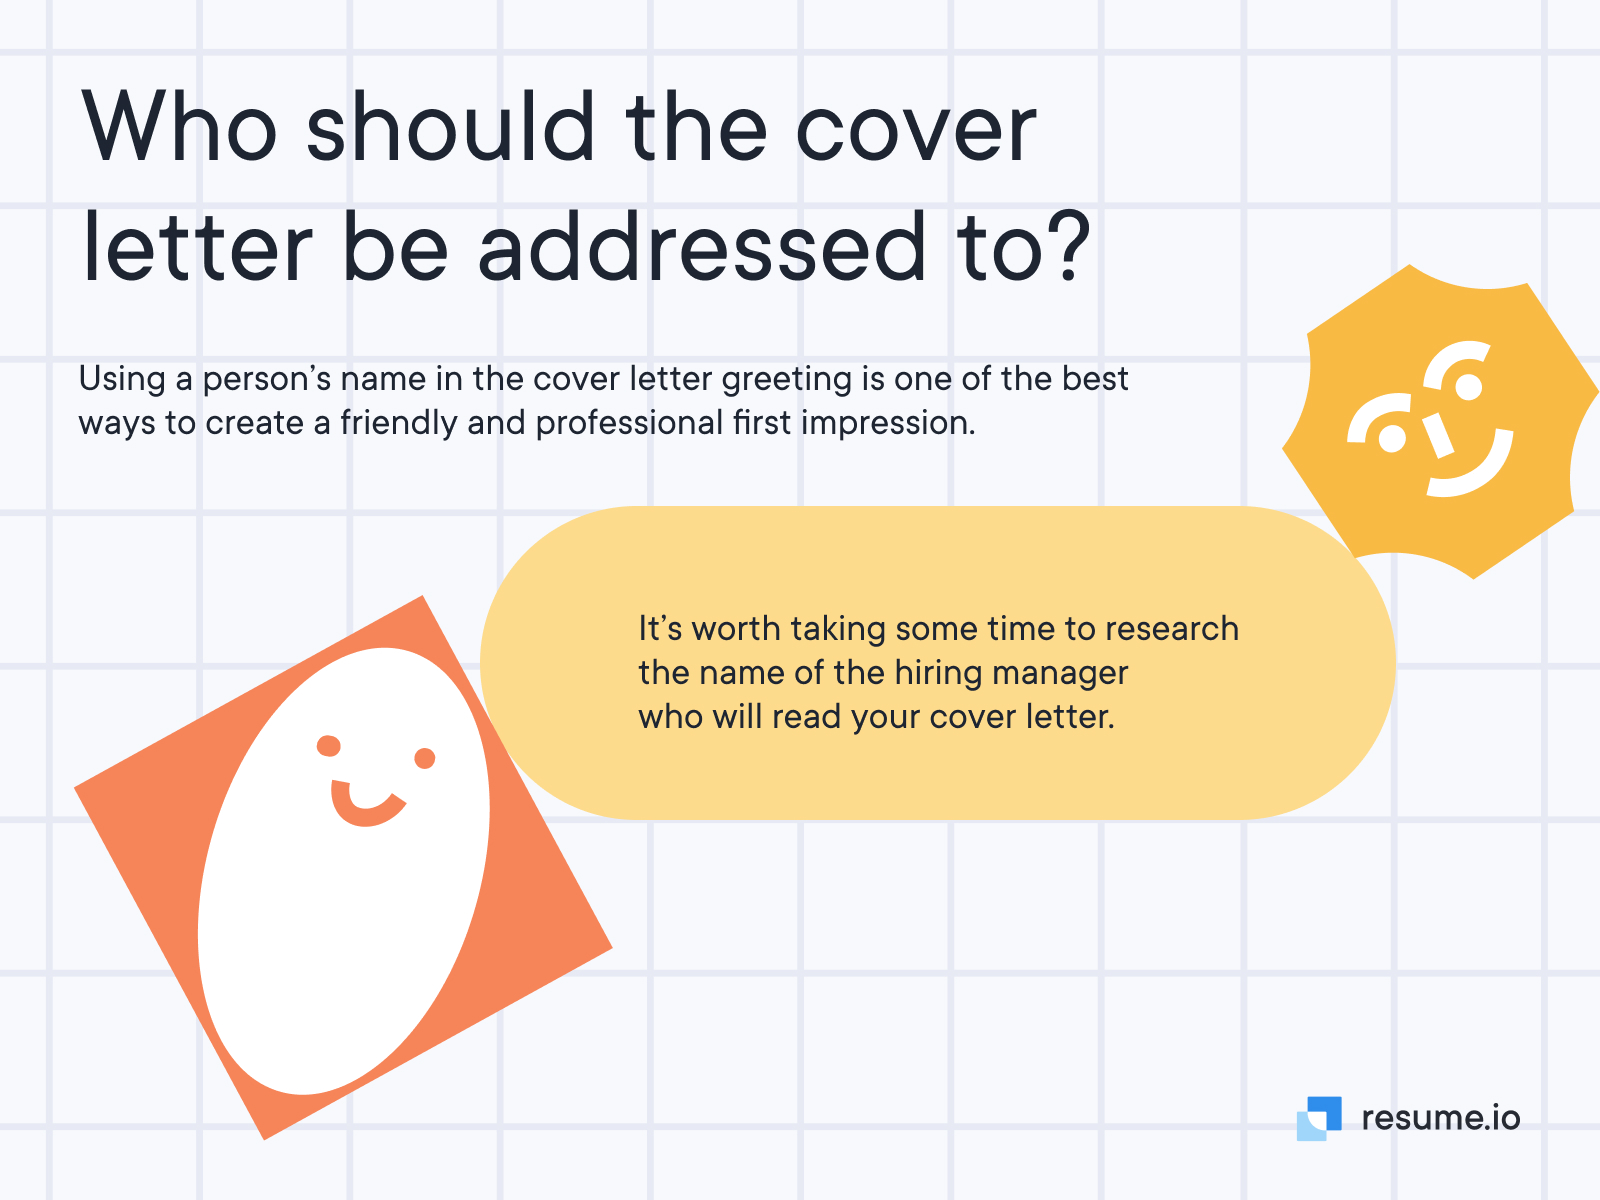 Who should the cover letter be addressed to?